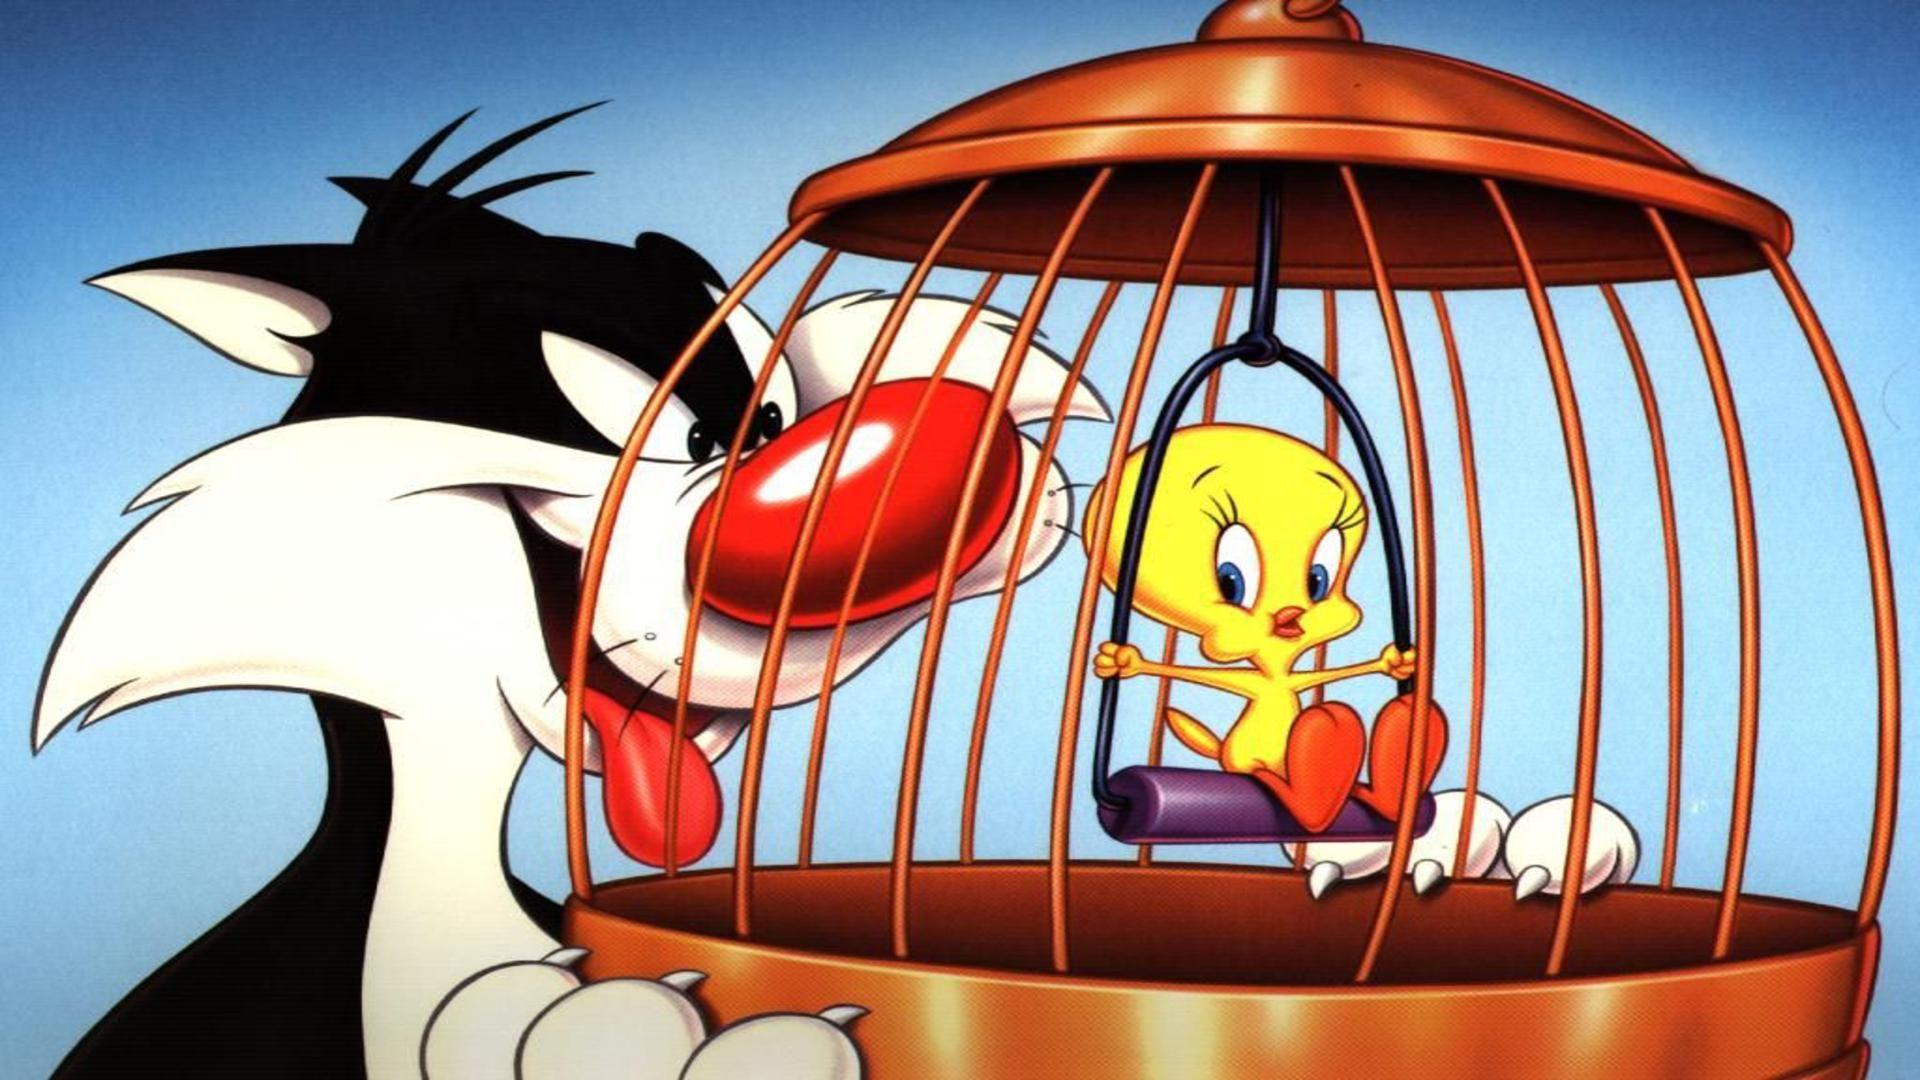 Sylvester tweety wallpaper cartoon frame cat and bird in cage free